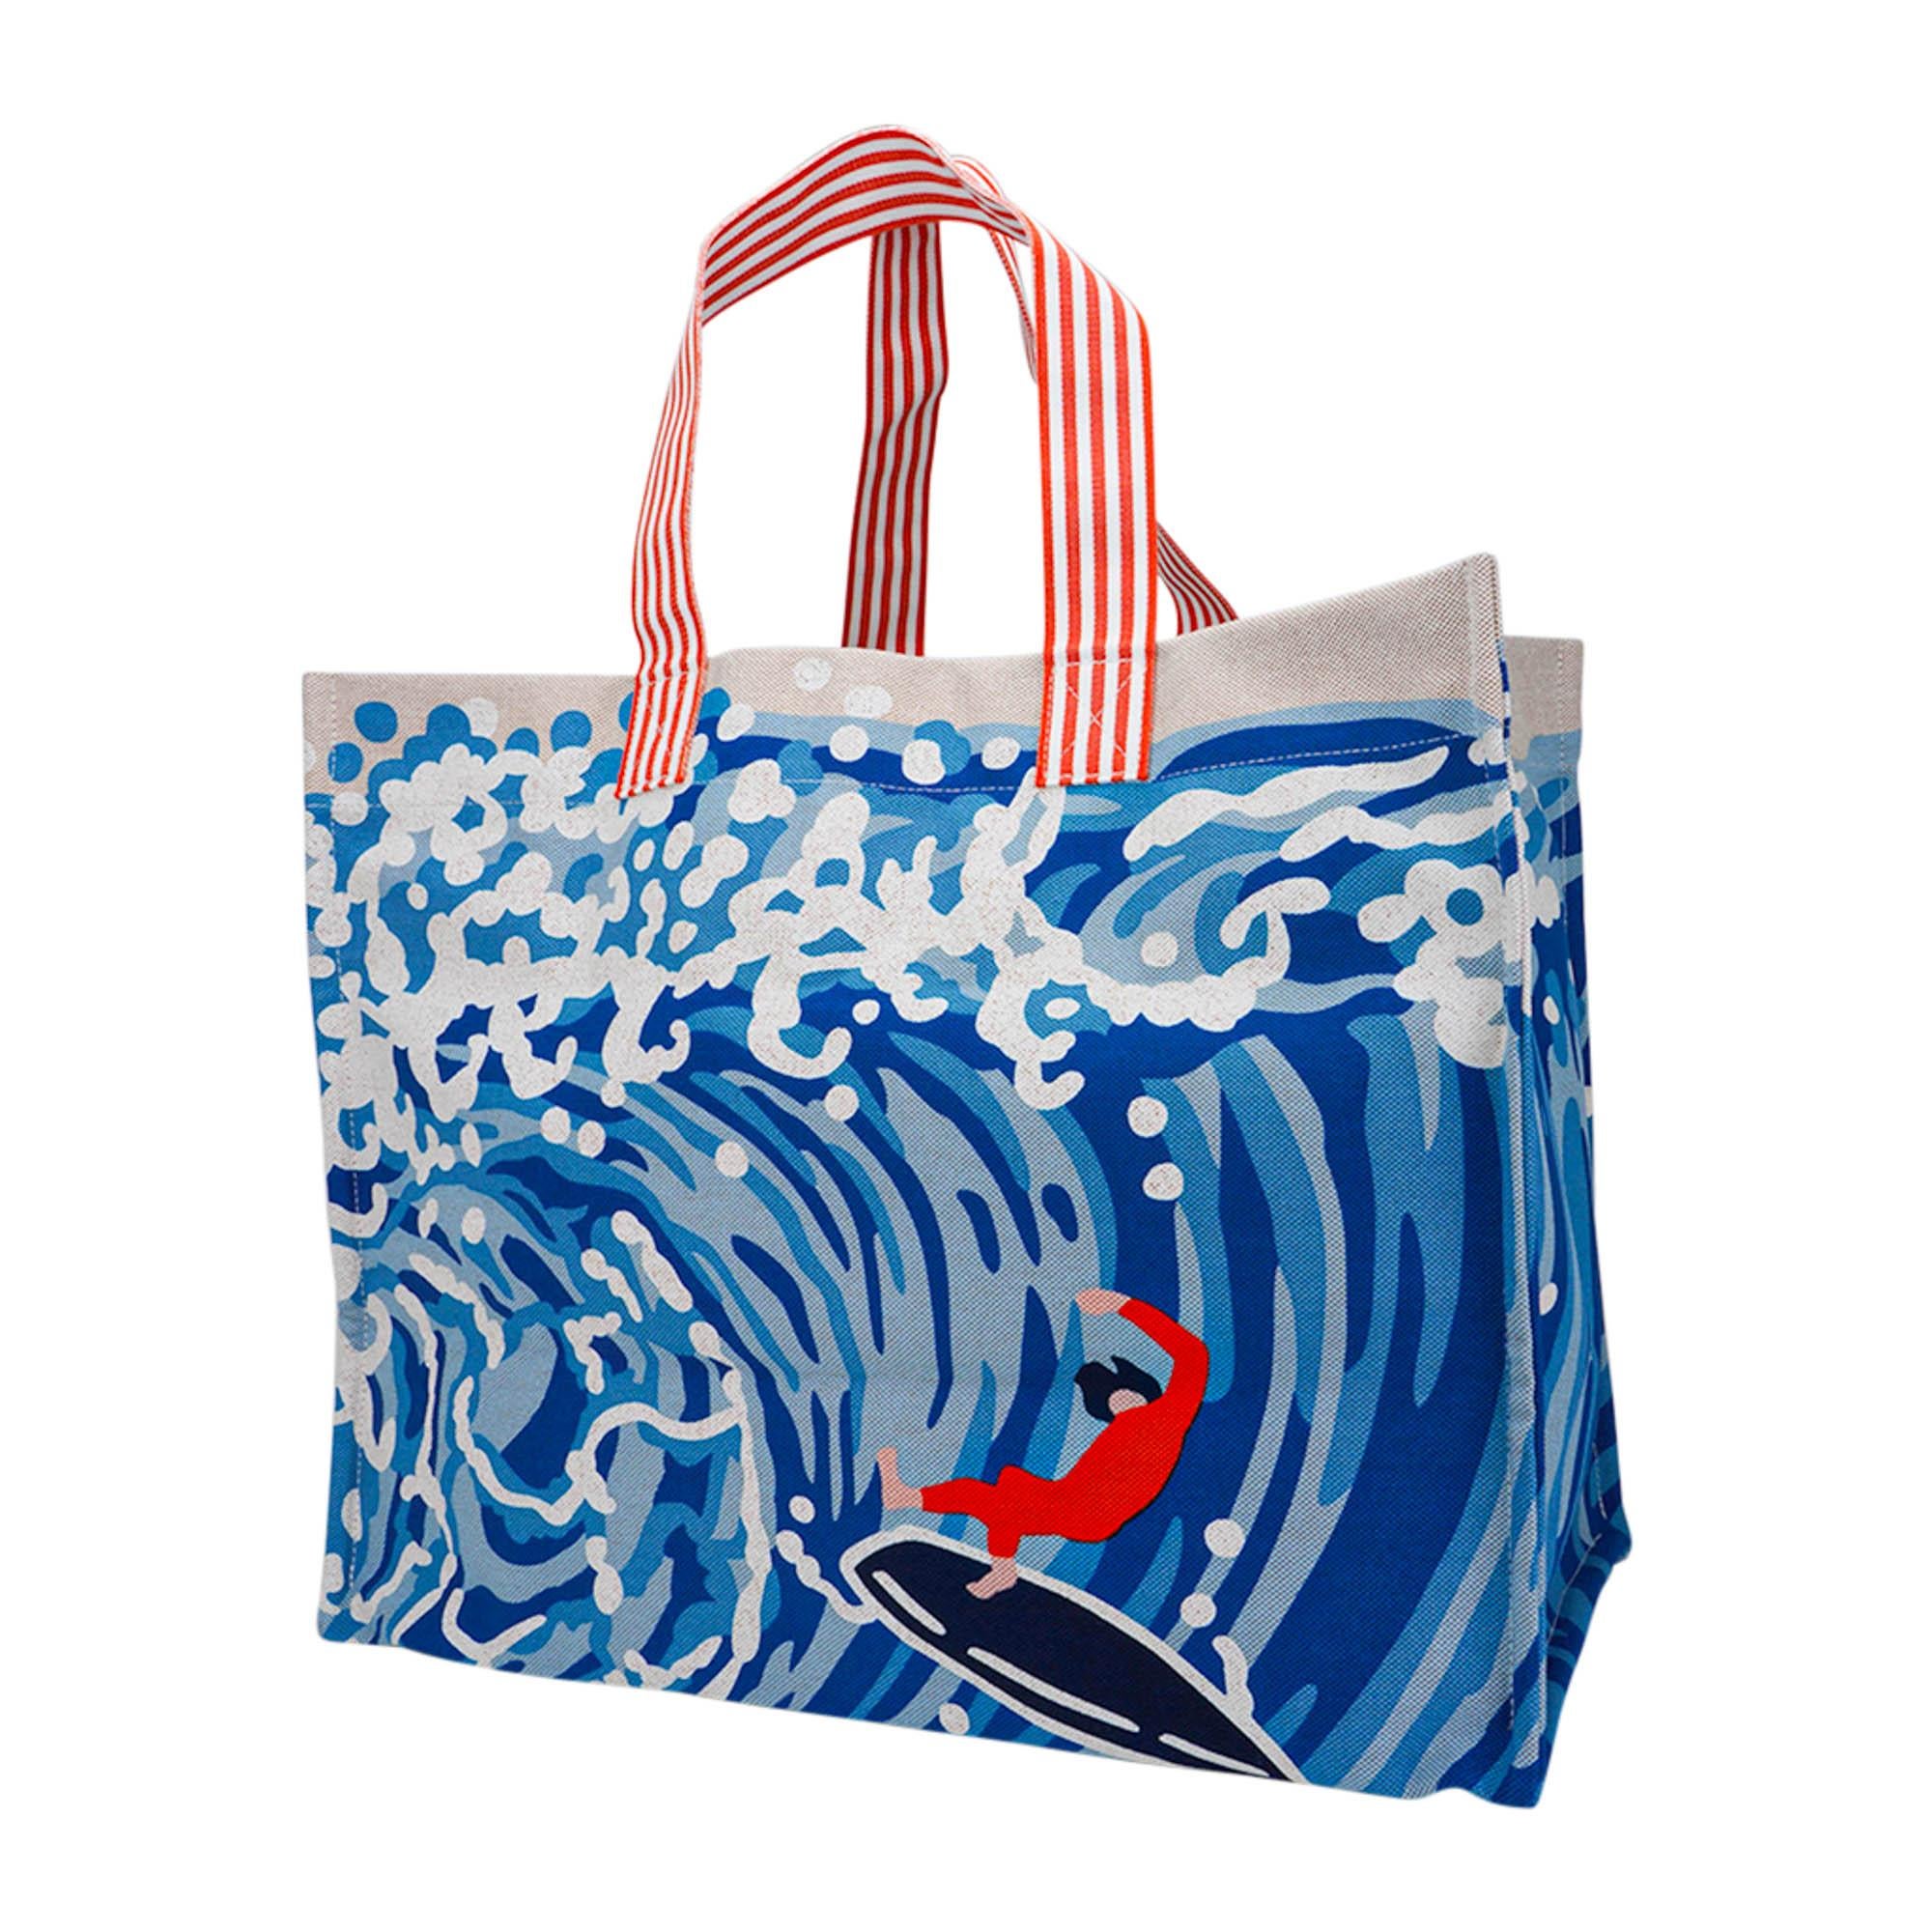 Hermes Beach Wave Tote Printed Toile Denim Bag In New Condition For Sale In Miami, FL